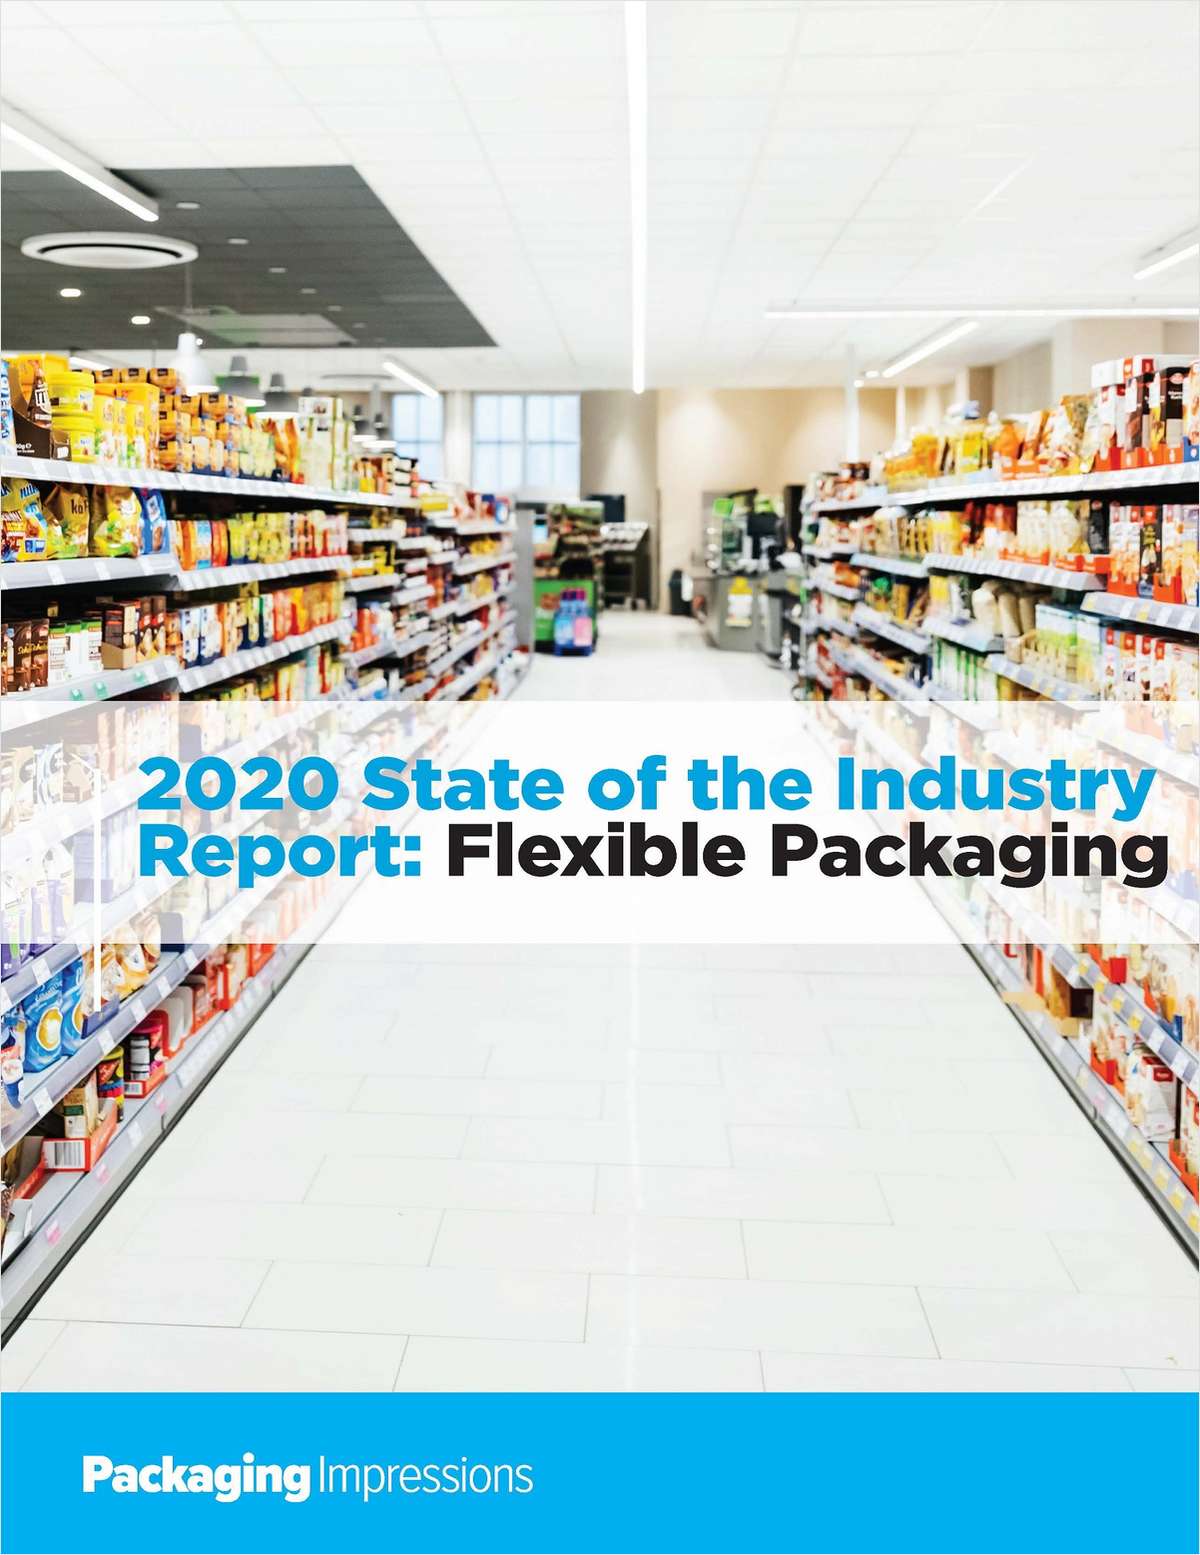 2020 State of the Industry Report: Flexible Packaging